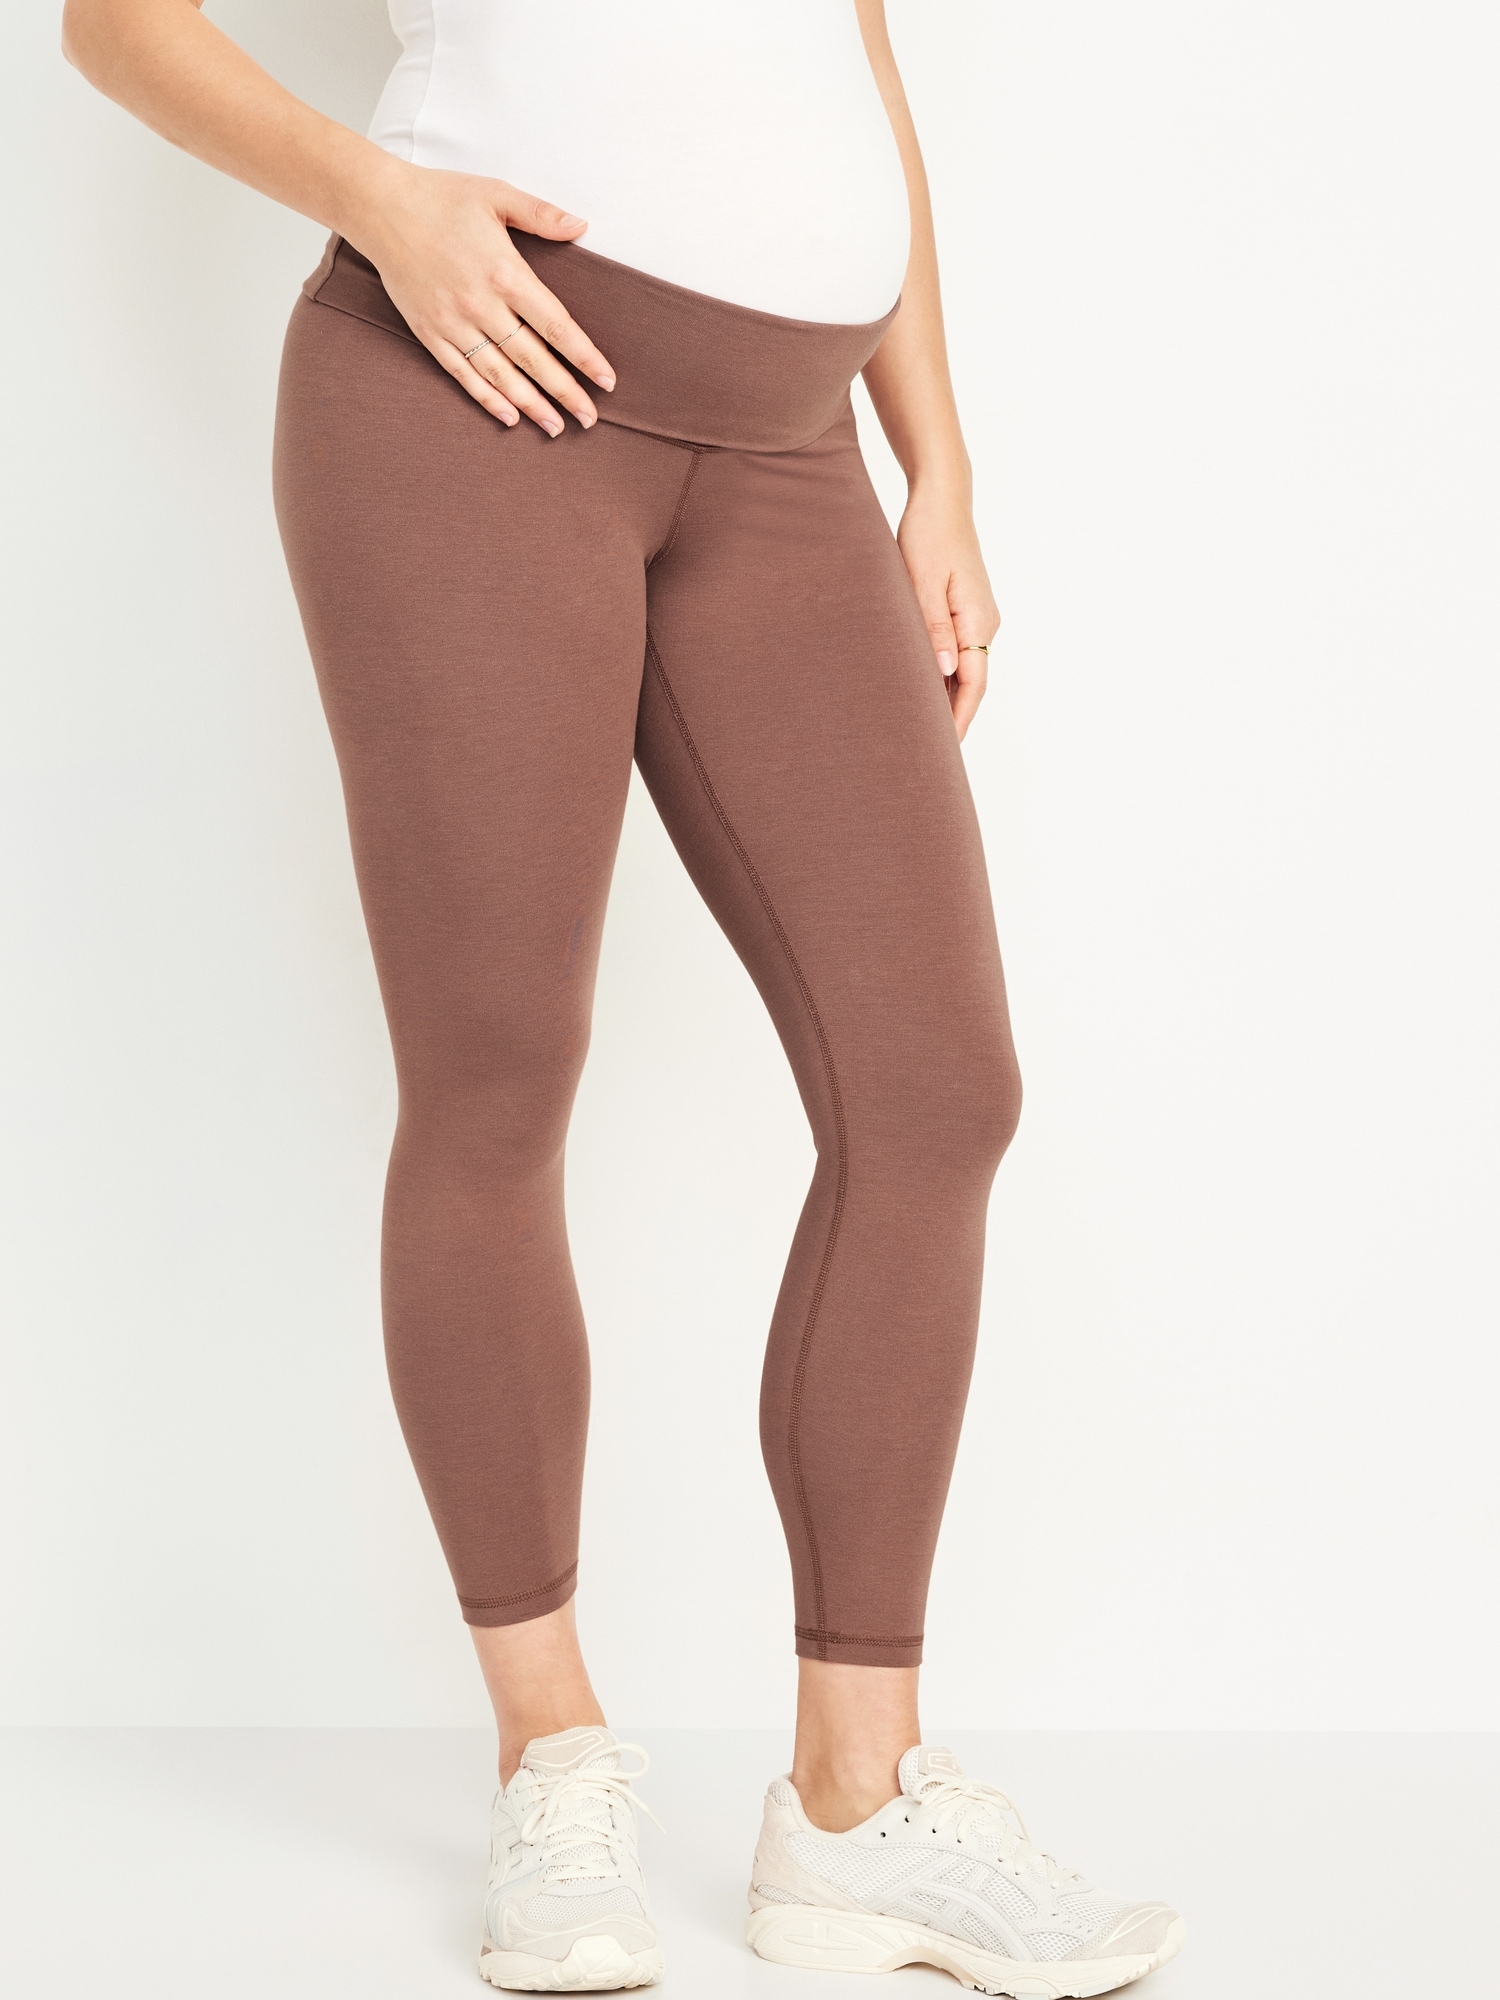 Old Navy Maternity Rollover-Waist PowerChill 7/8-Length Leggings, Old Navy  deals this week, Old Navy weekly ad